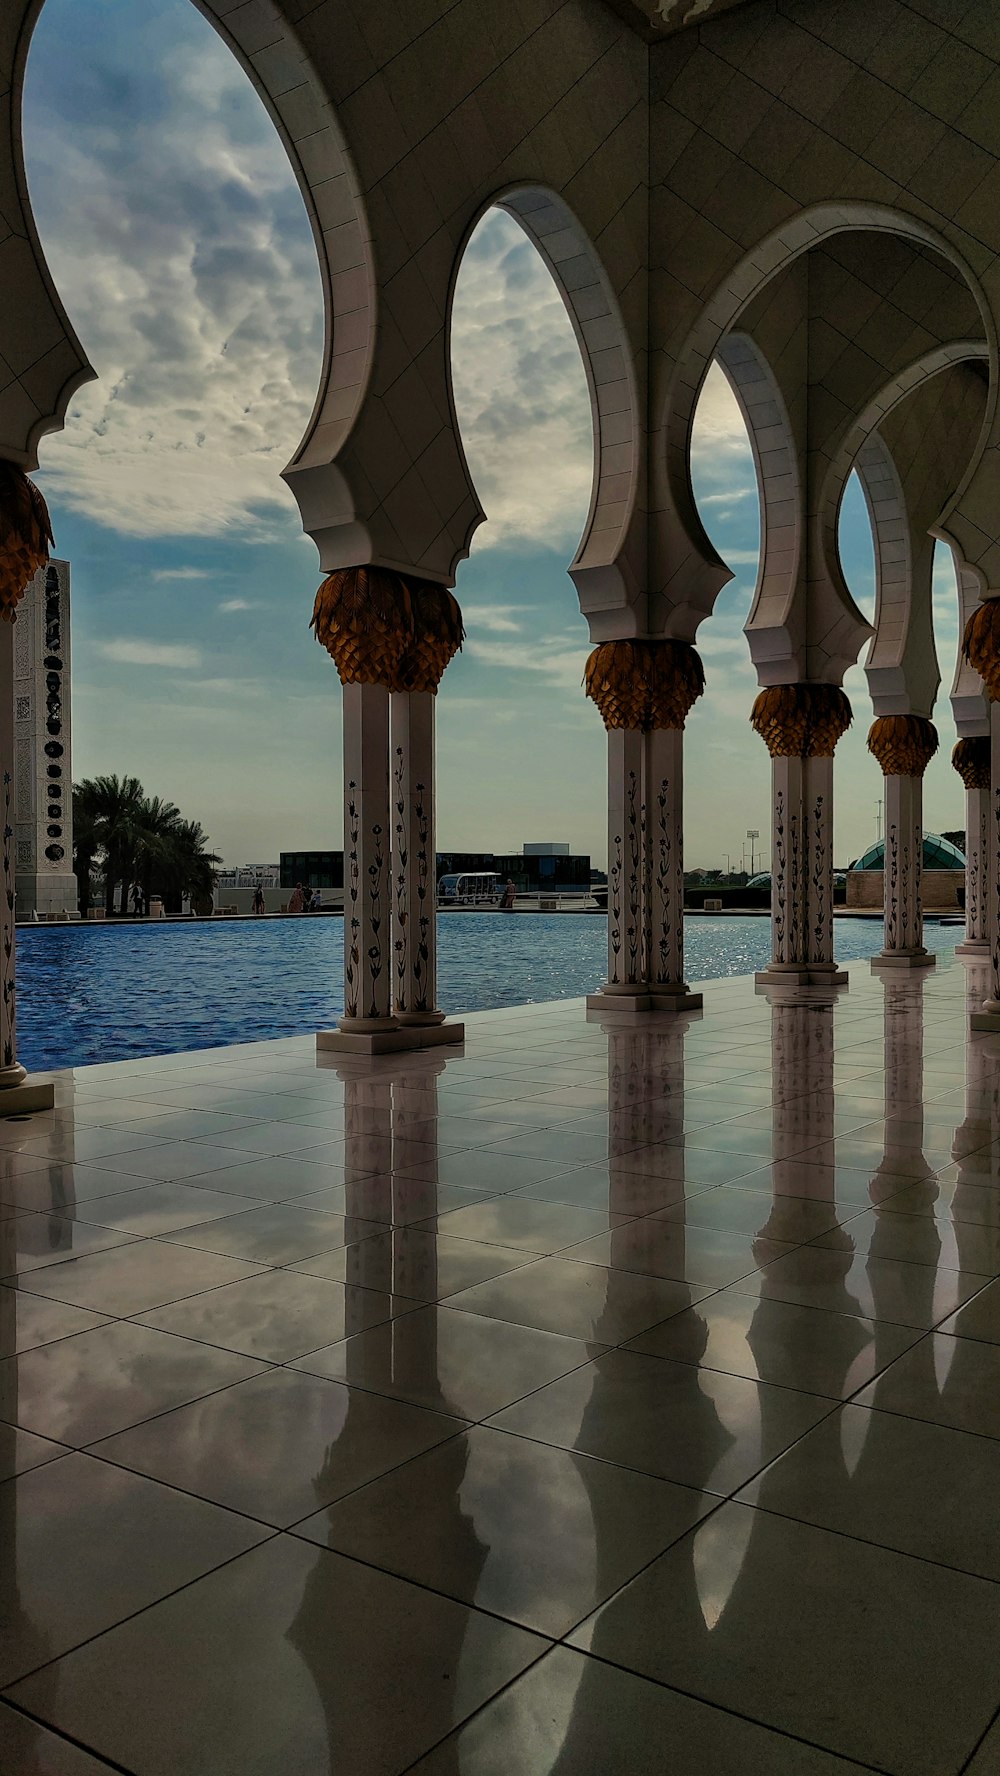 a view of a pool through a row of arches